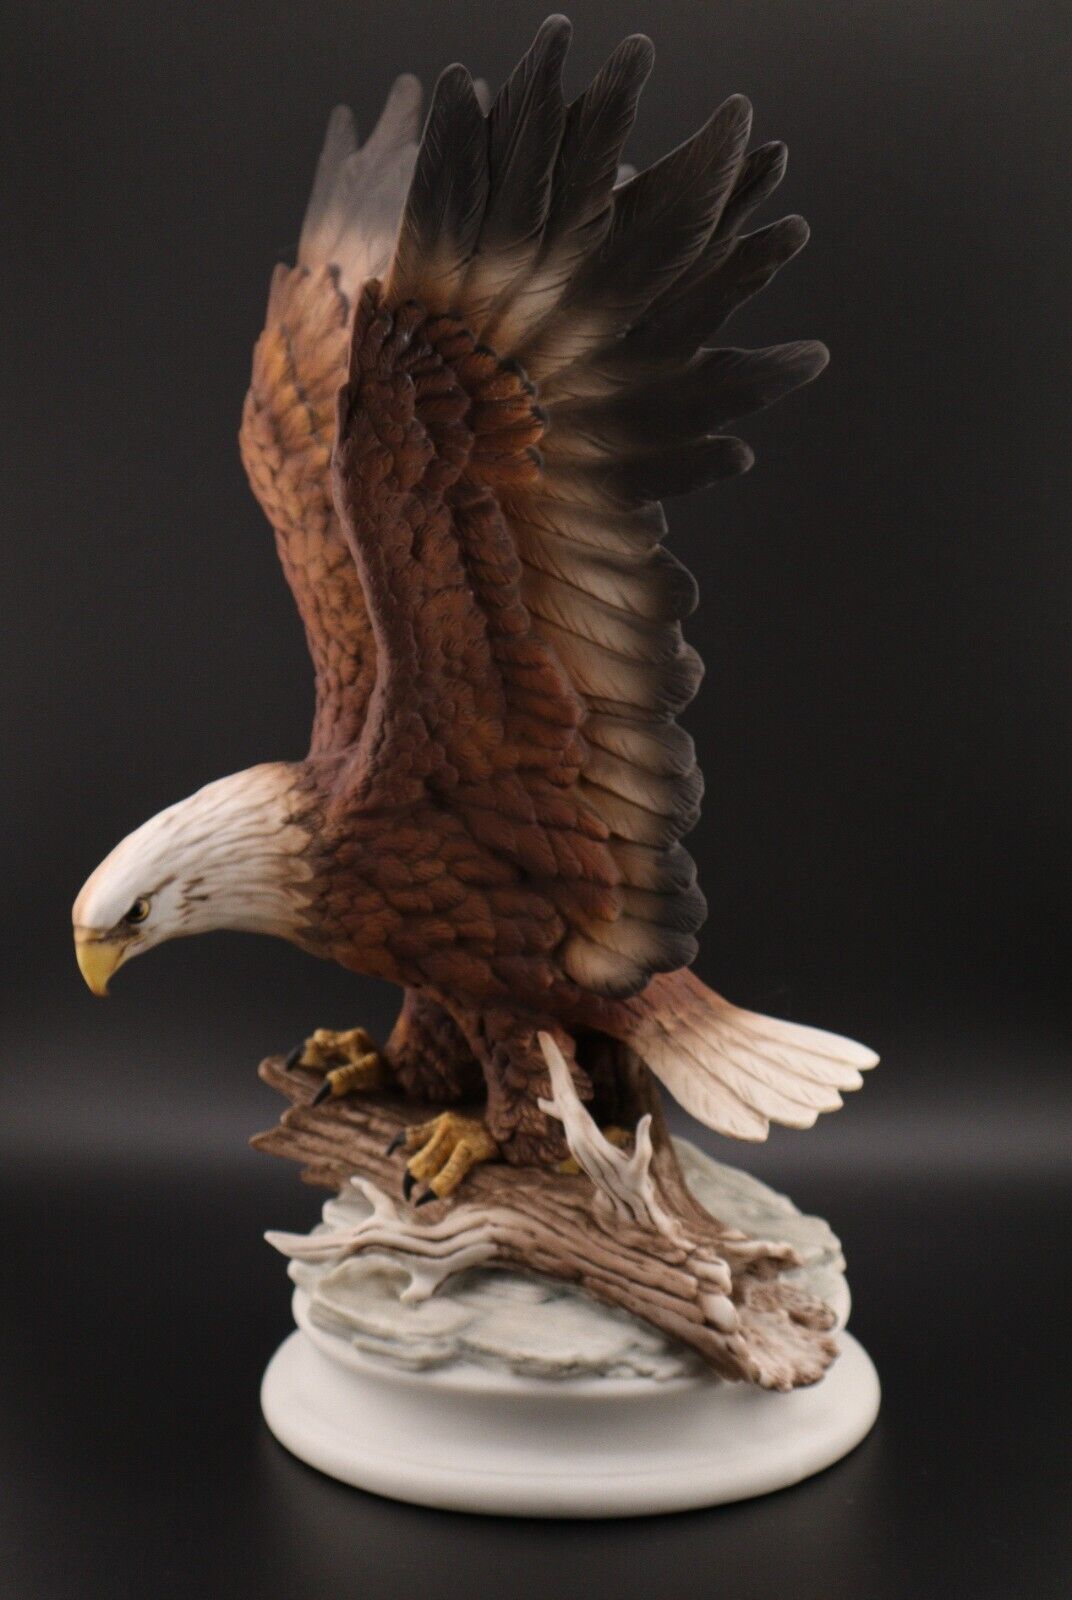 4th of July - Vntg. MASTERPIECE BY HOMCO - Large Porcelain Eagle figurine